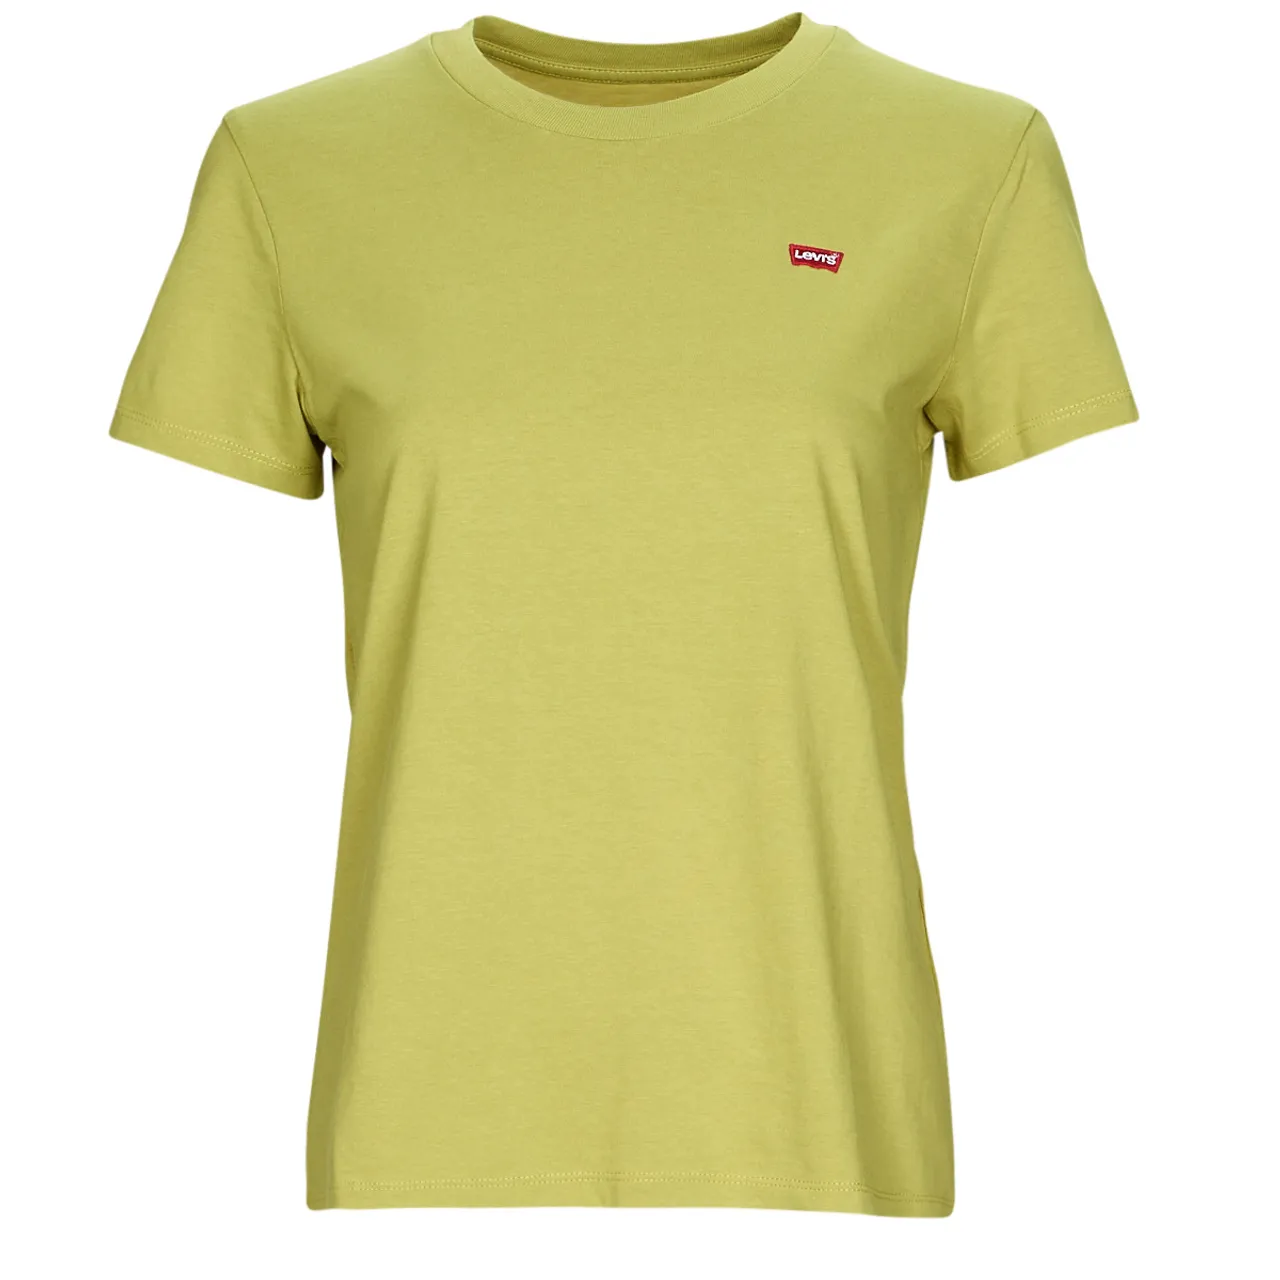 Levis  PERFECT TEE  women's T shirt in Yellow